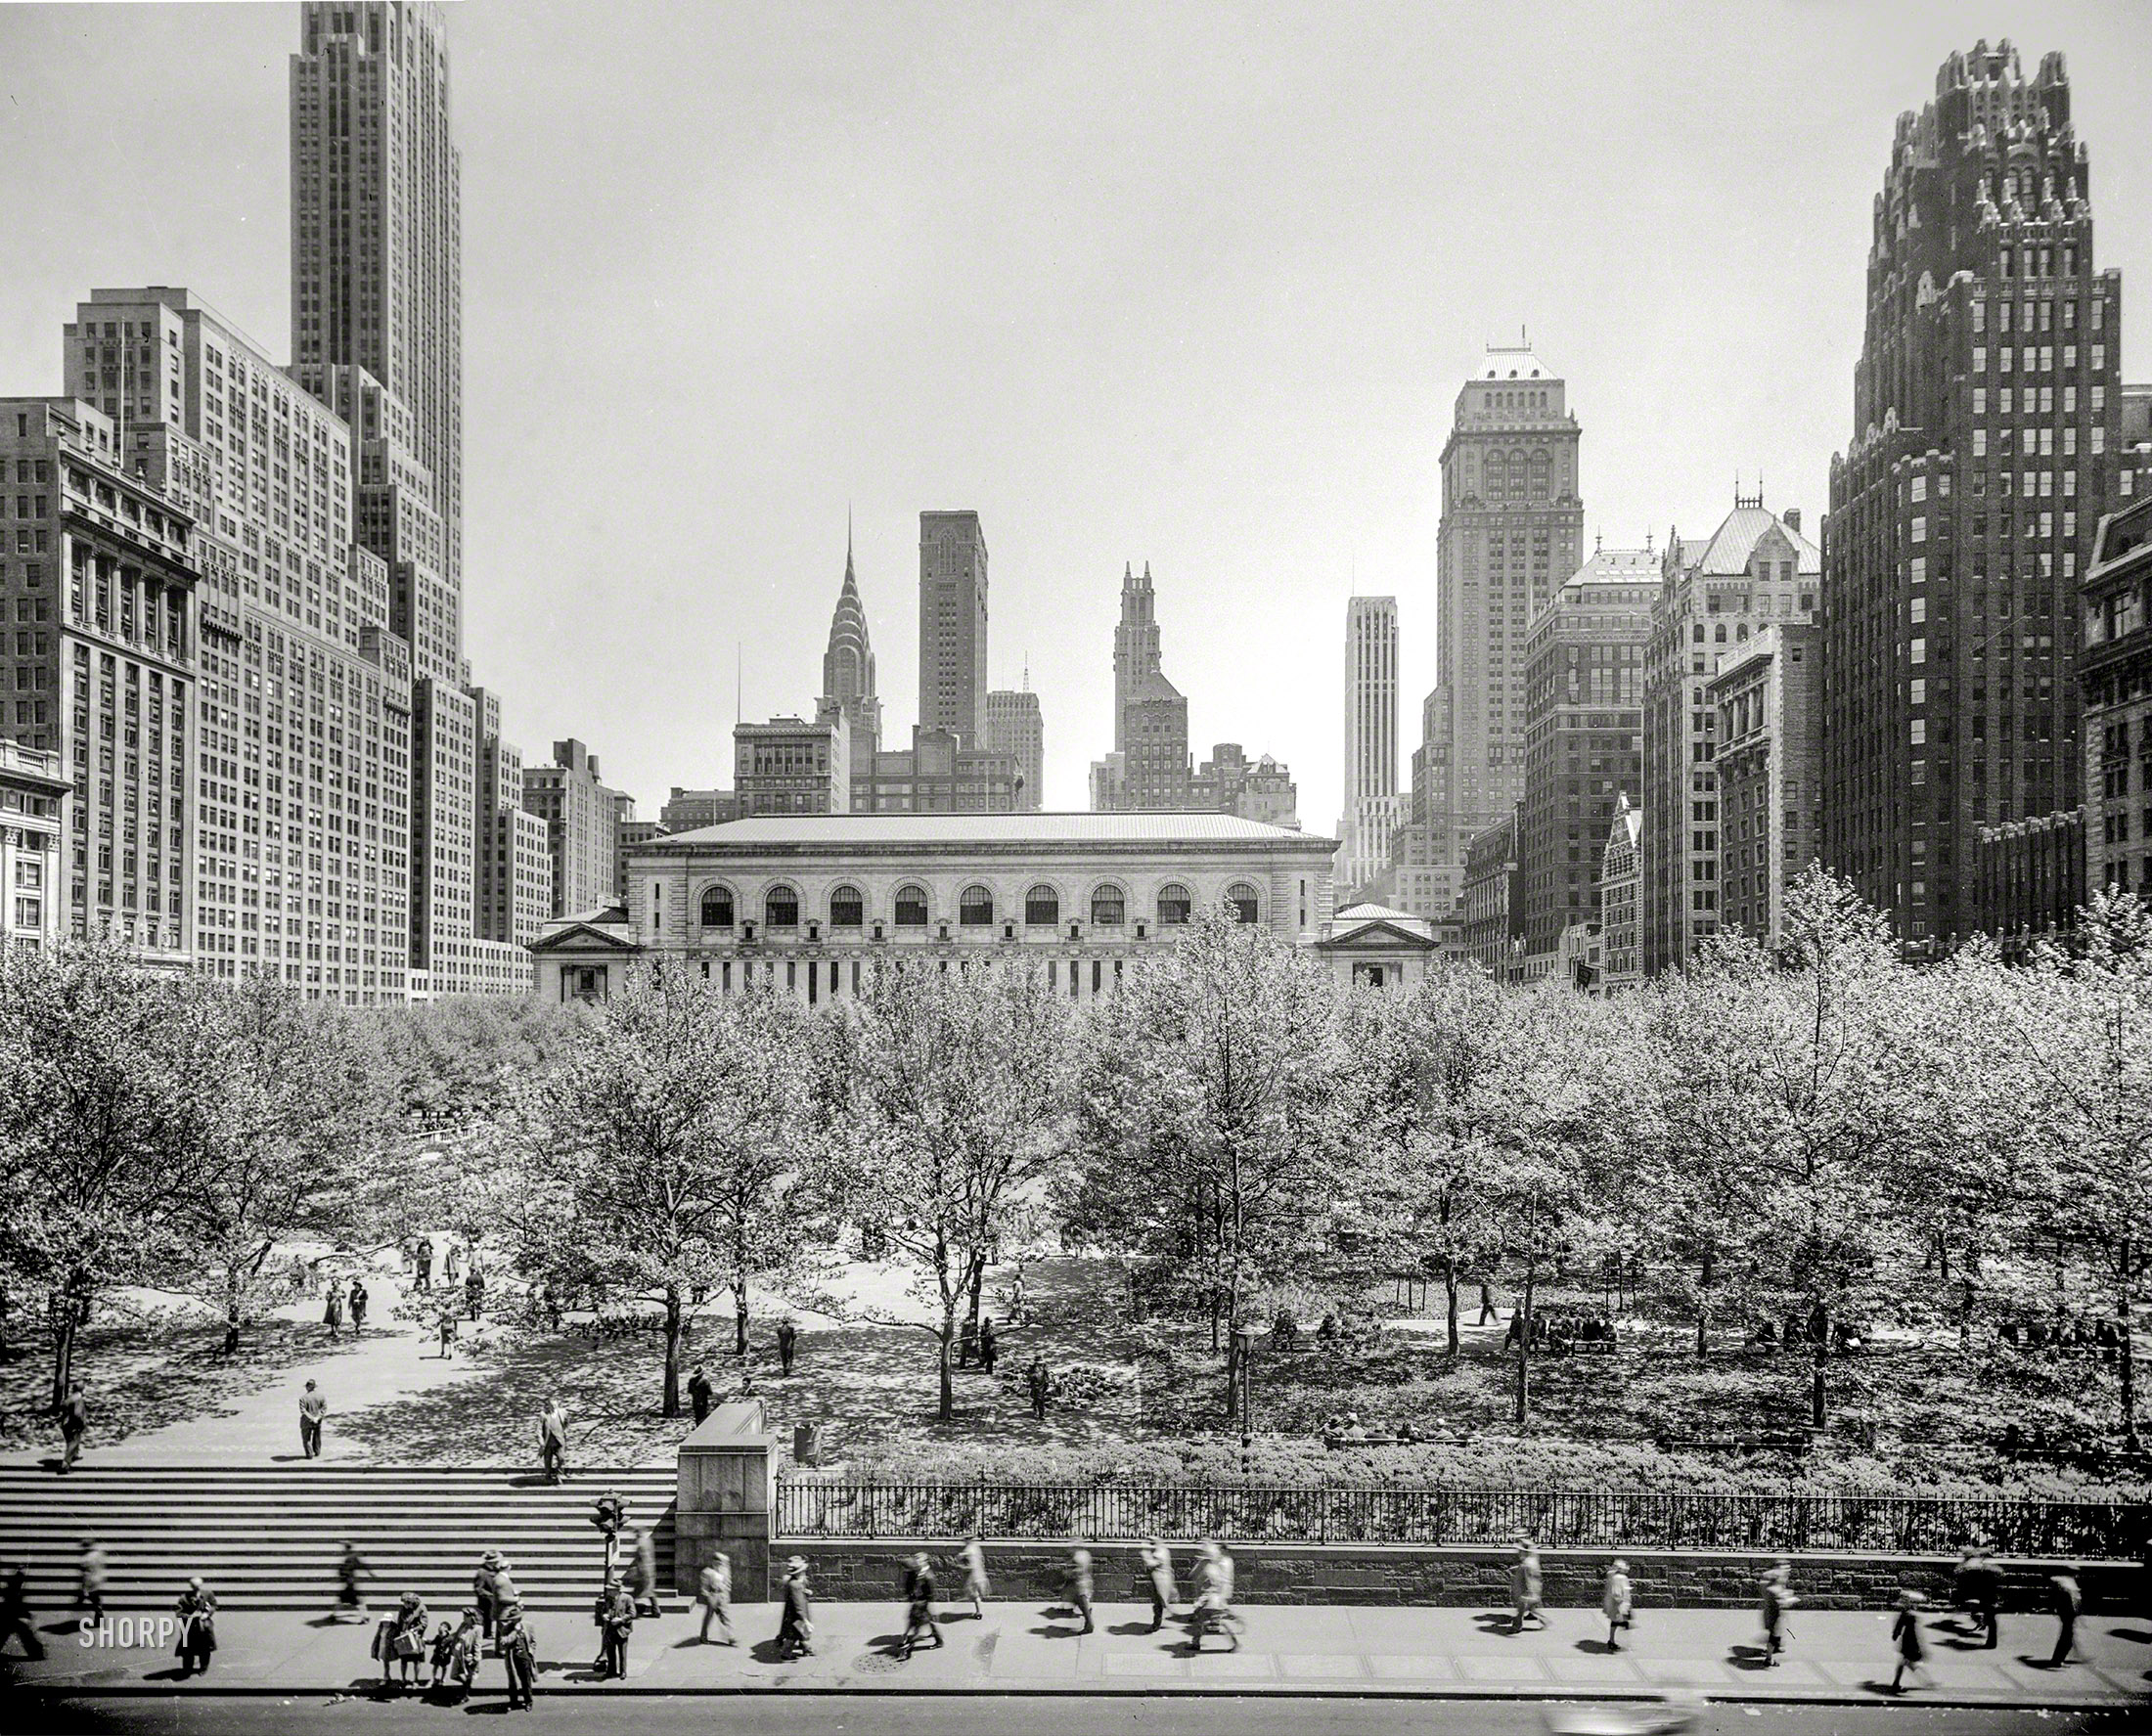 New York City circa 1948. "Bryant Park and New York Public Library from Sixth Avenue." With views of the Chrysler Building and other Manhattan landmarks waiting to be named. 4x5 inch acetate negative by John M. Fox. View full size.